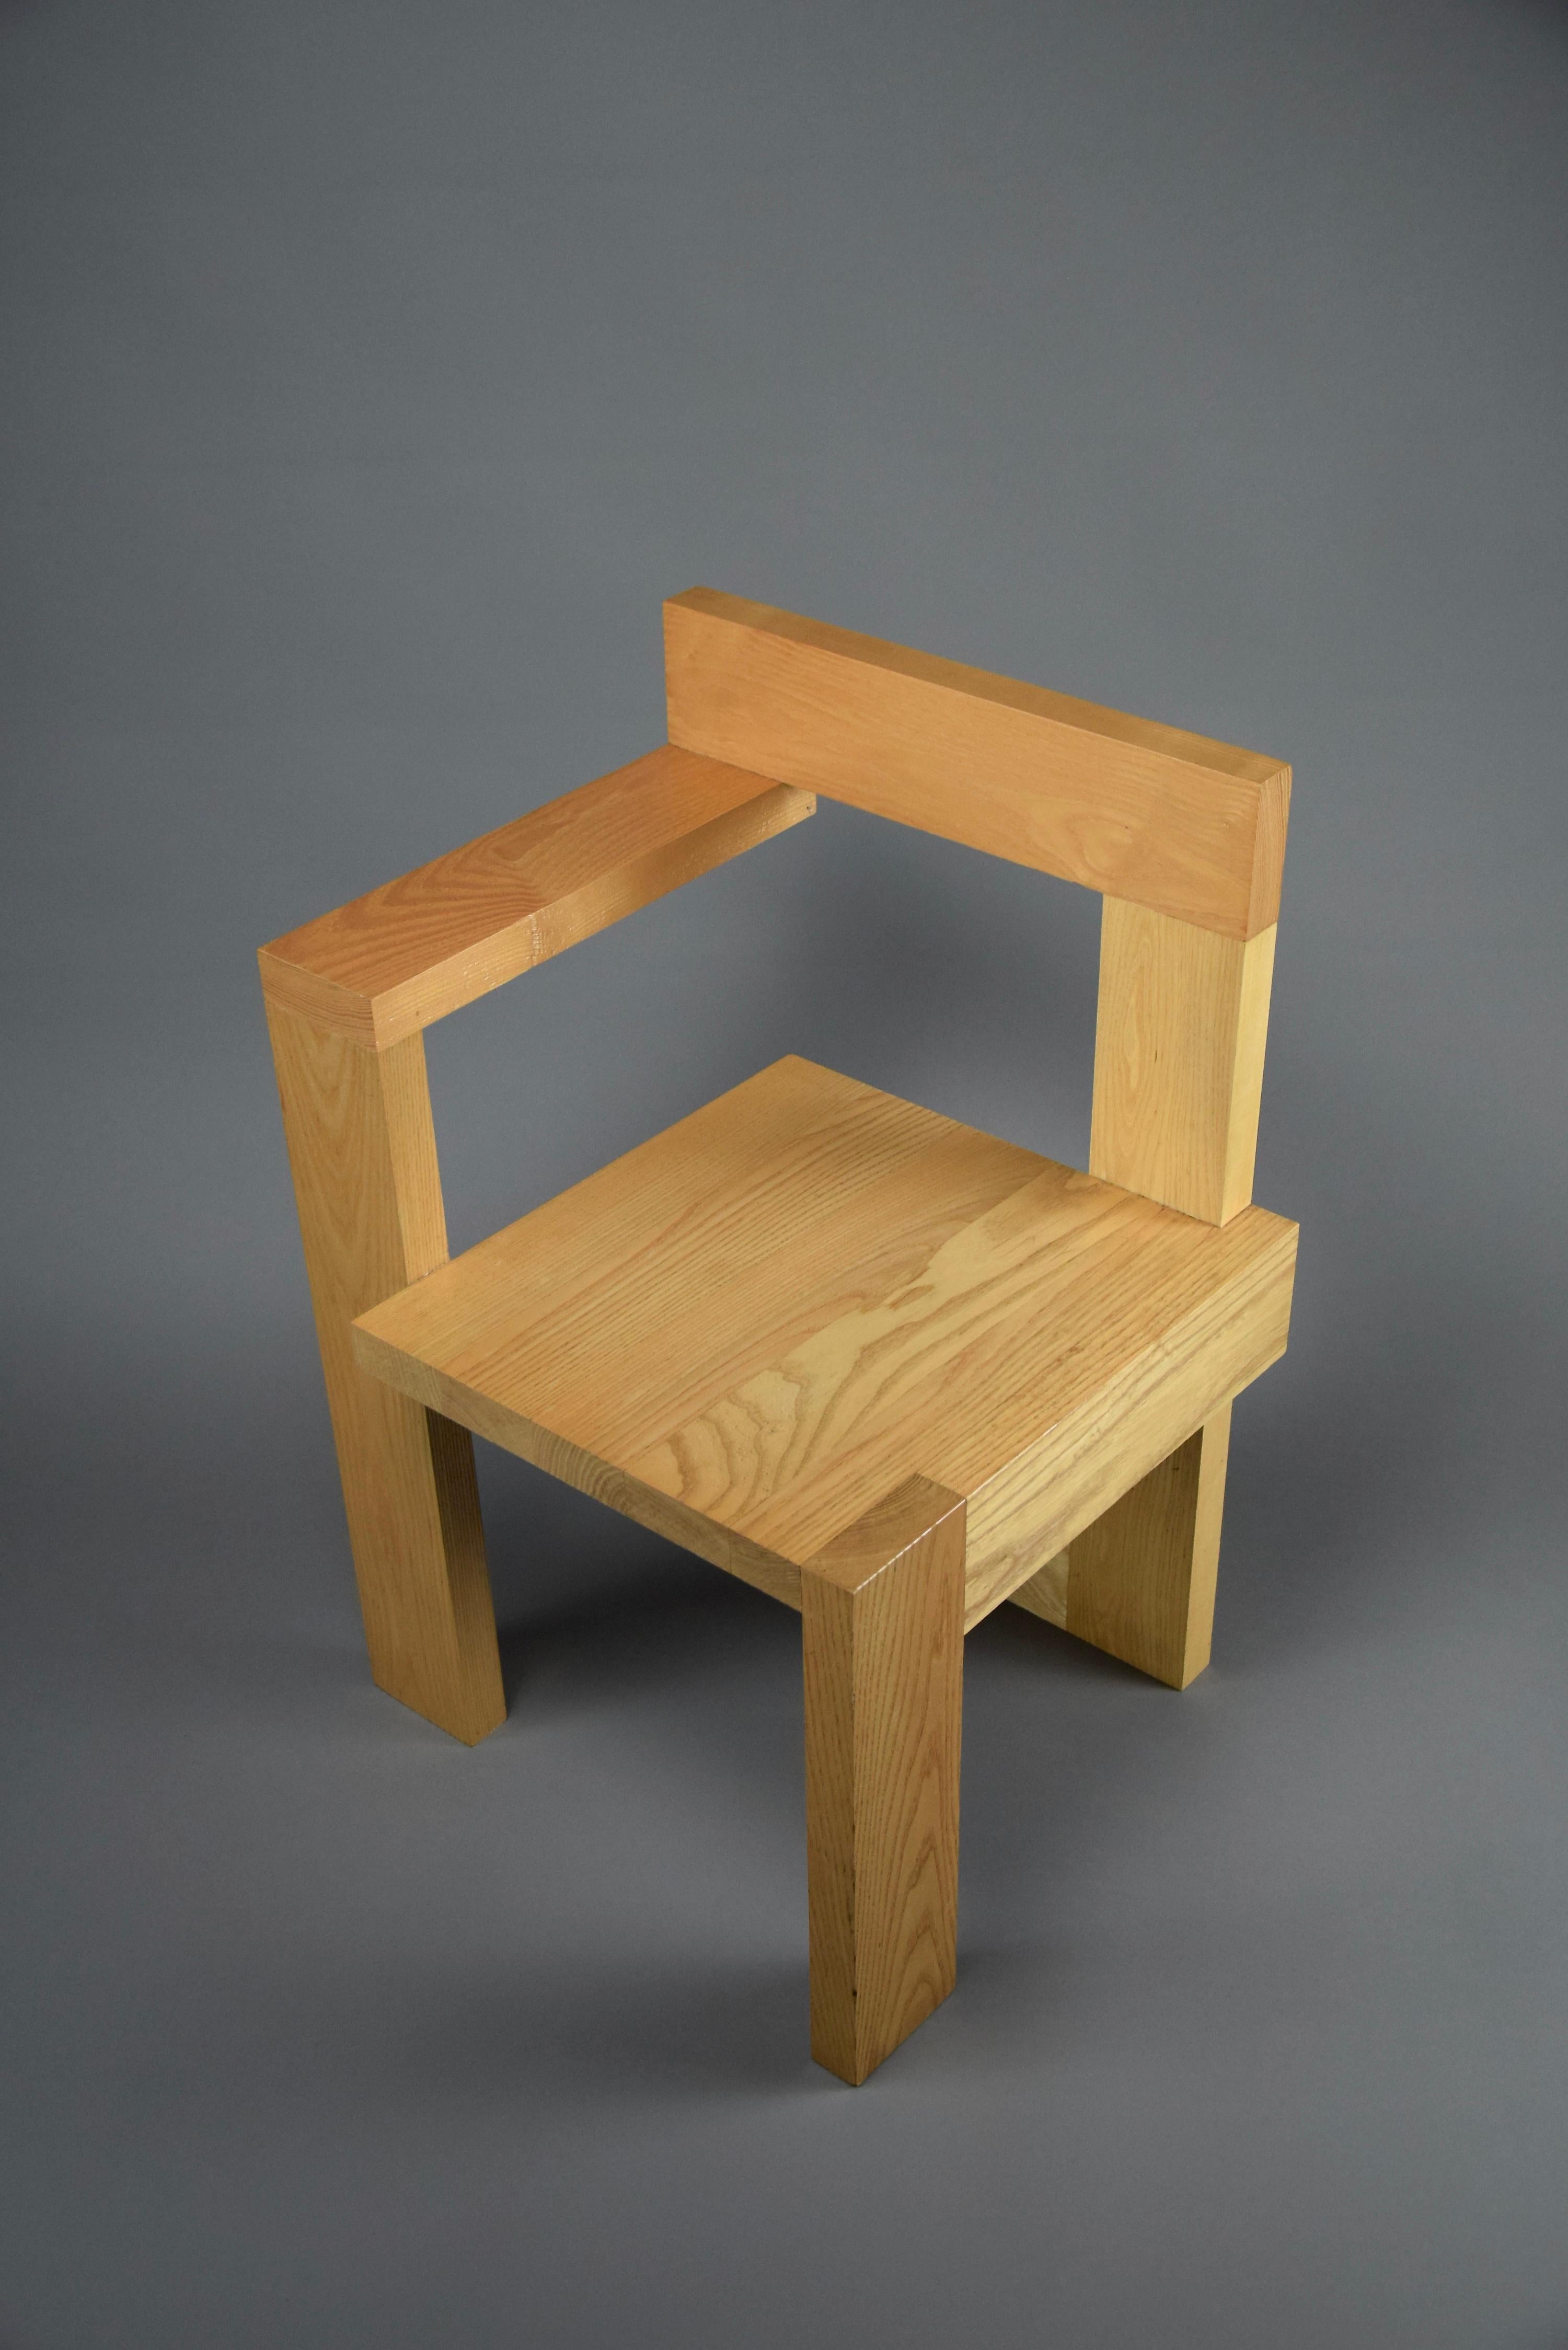 Introducing the Timeless Classic: The Solid Oak Steltman Chair
Experience the elegance and history of design with our impeccably crafted Solid Oak Steltman Chair, a homage to the iconic Gerrit Rietveld's 1963 masterpiece.
Craftsmanship That